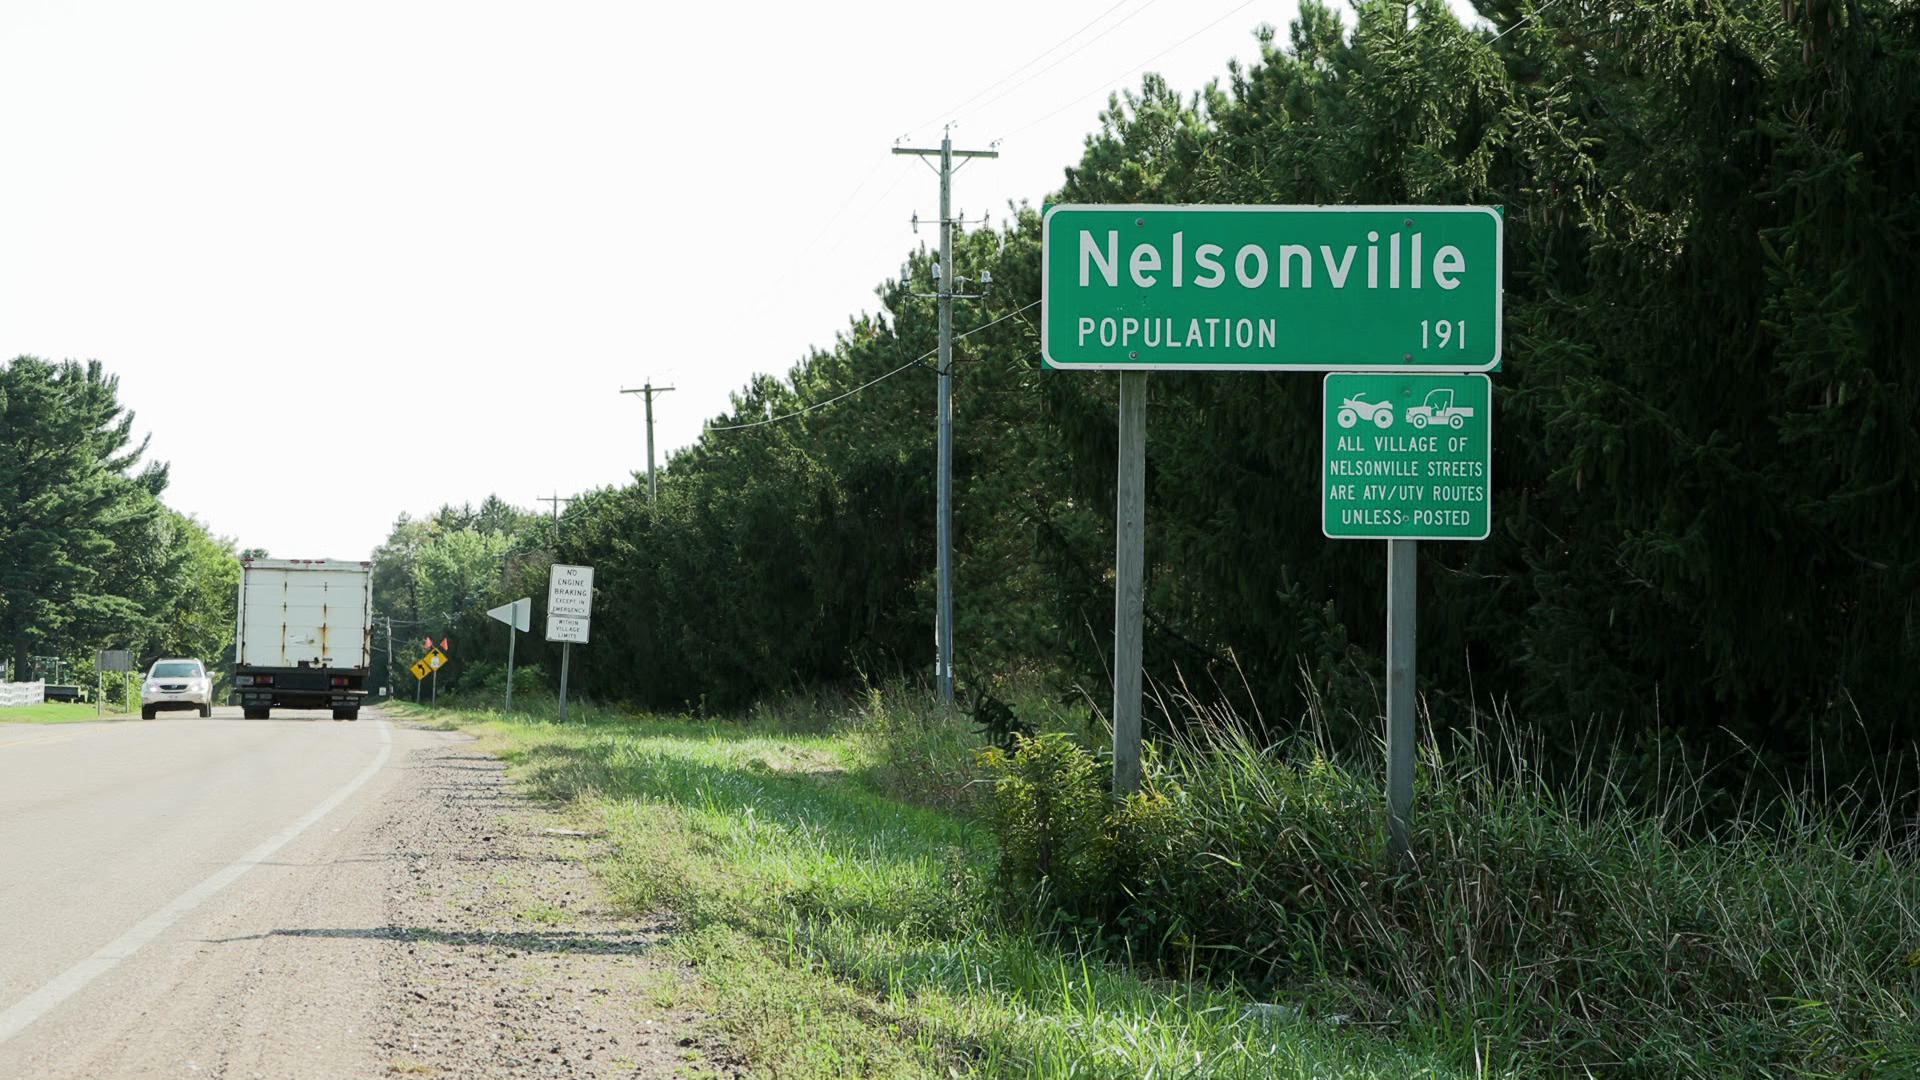 A roadside sign reading "Nelsonville Population 191" stands alongside a road next to another sign addressing ATV/UTV traffic, with multiple vehicles, trees and powerlines in the background.